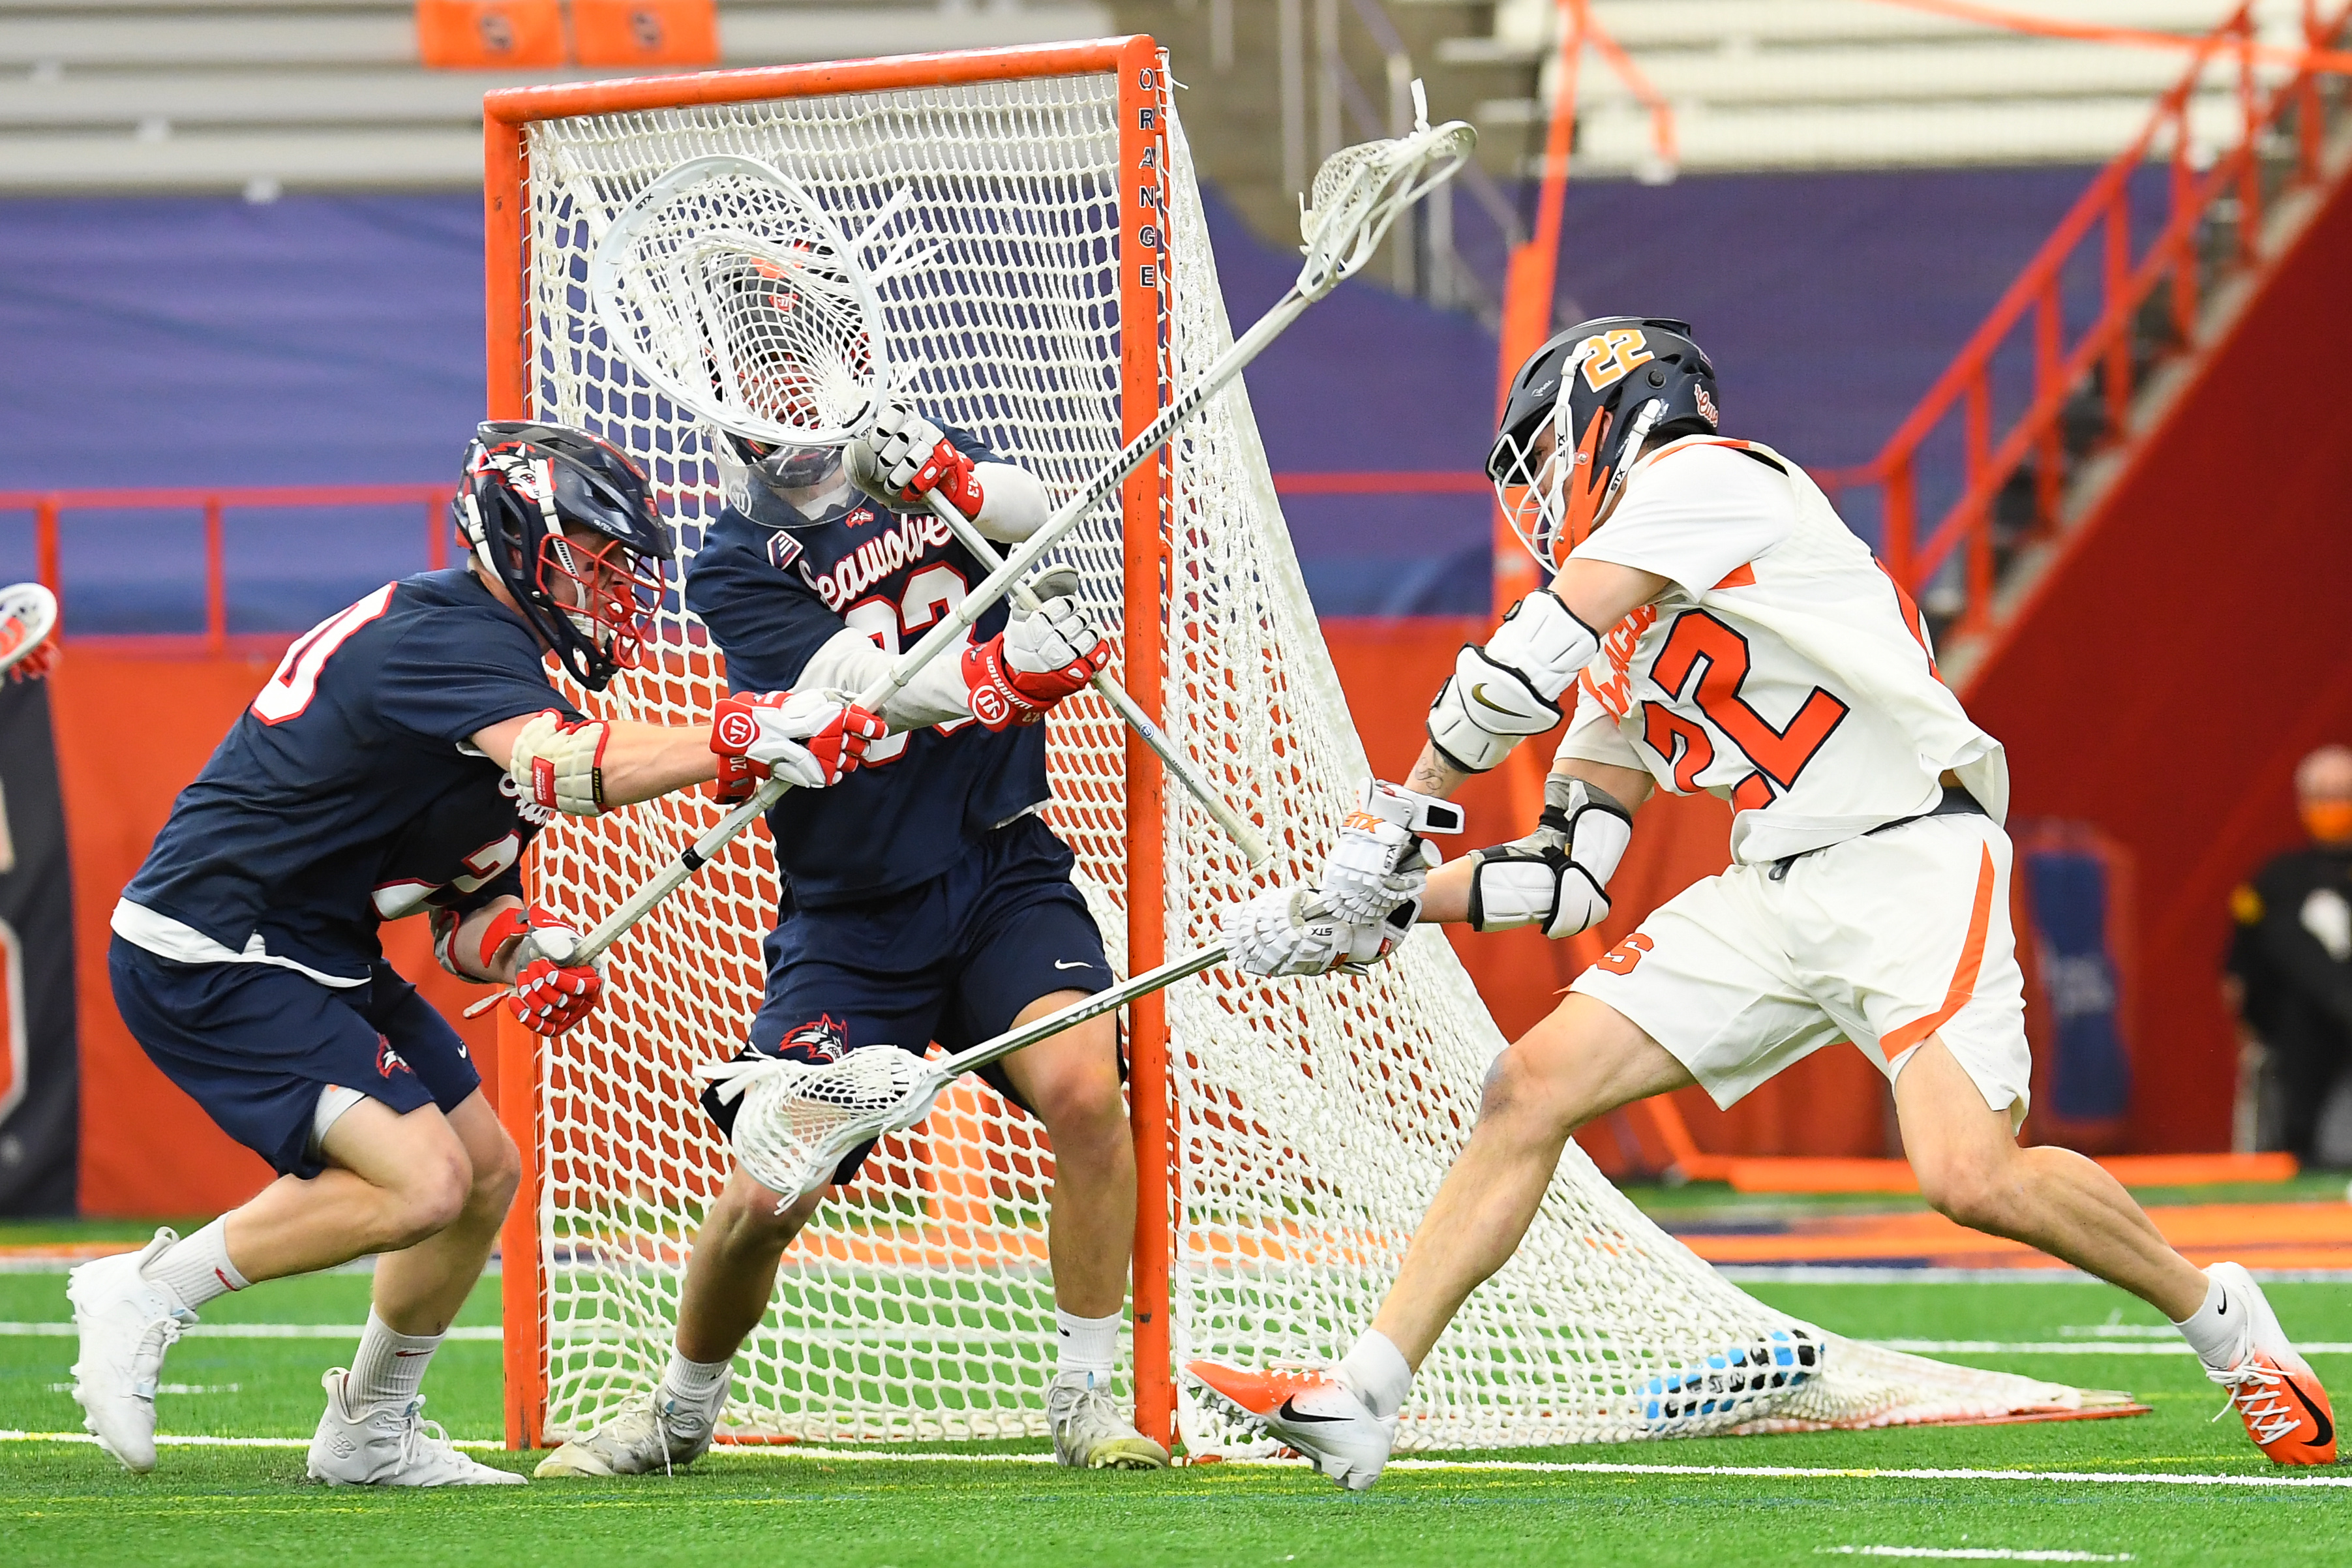 Mar 12, 2021; Syracuse, New York, USA; Syracuse Orange attackman Chase Scanlan (22) takes a back-hand shot on Stony Brook Seawolves goalie Anthony Palma (33) during the first half at the Carrier Dome. Mandatory Credit: Rich Barnes